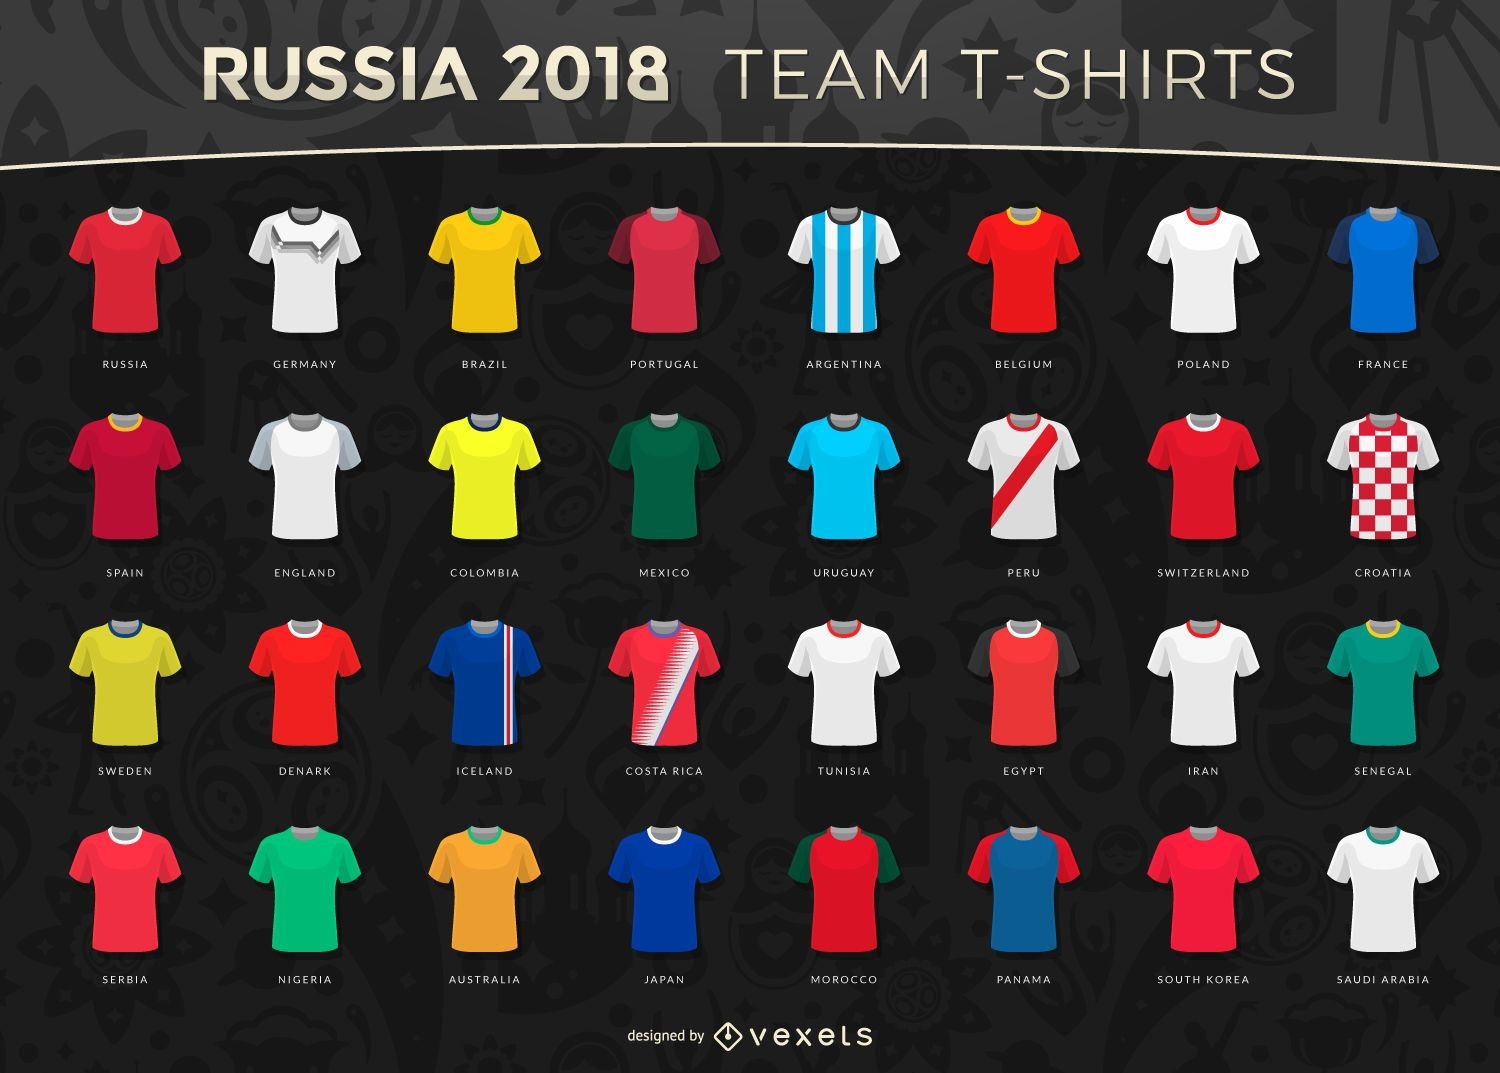 Russia 2018 World Cup team t-shirts